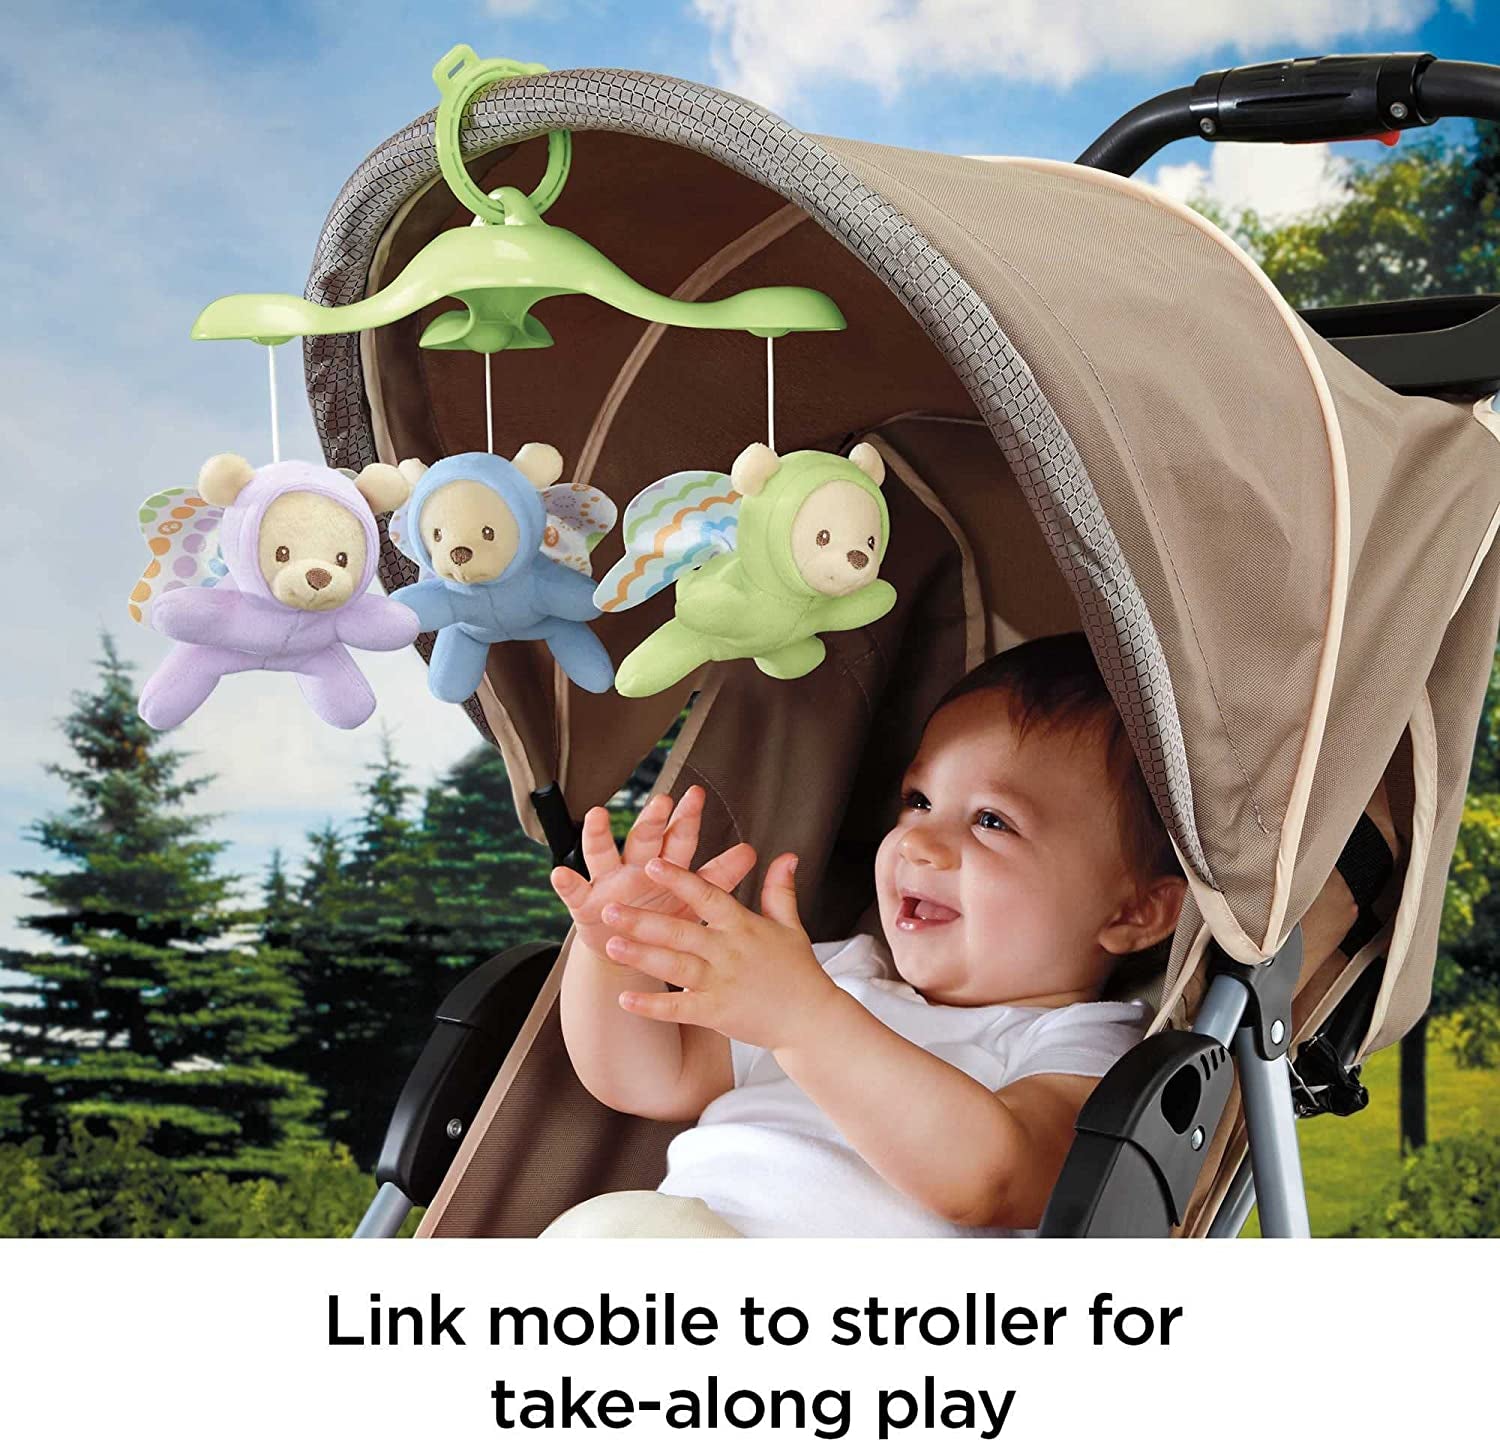 Fisher-Price Butterfly Dreams 3-in-1 Projection Mobile - Crib Toy & Sound Machine - Star Projection - Soothing Music - Gift for Babies, CDN41